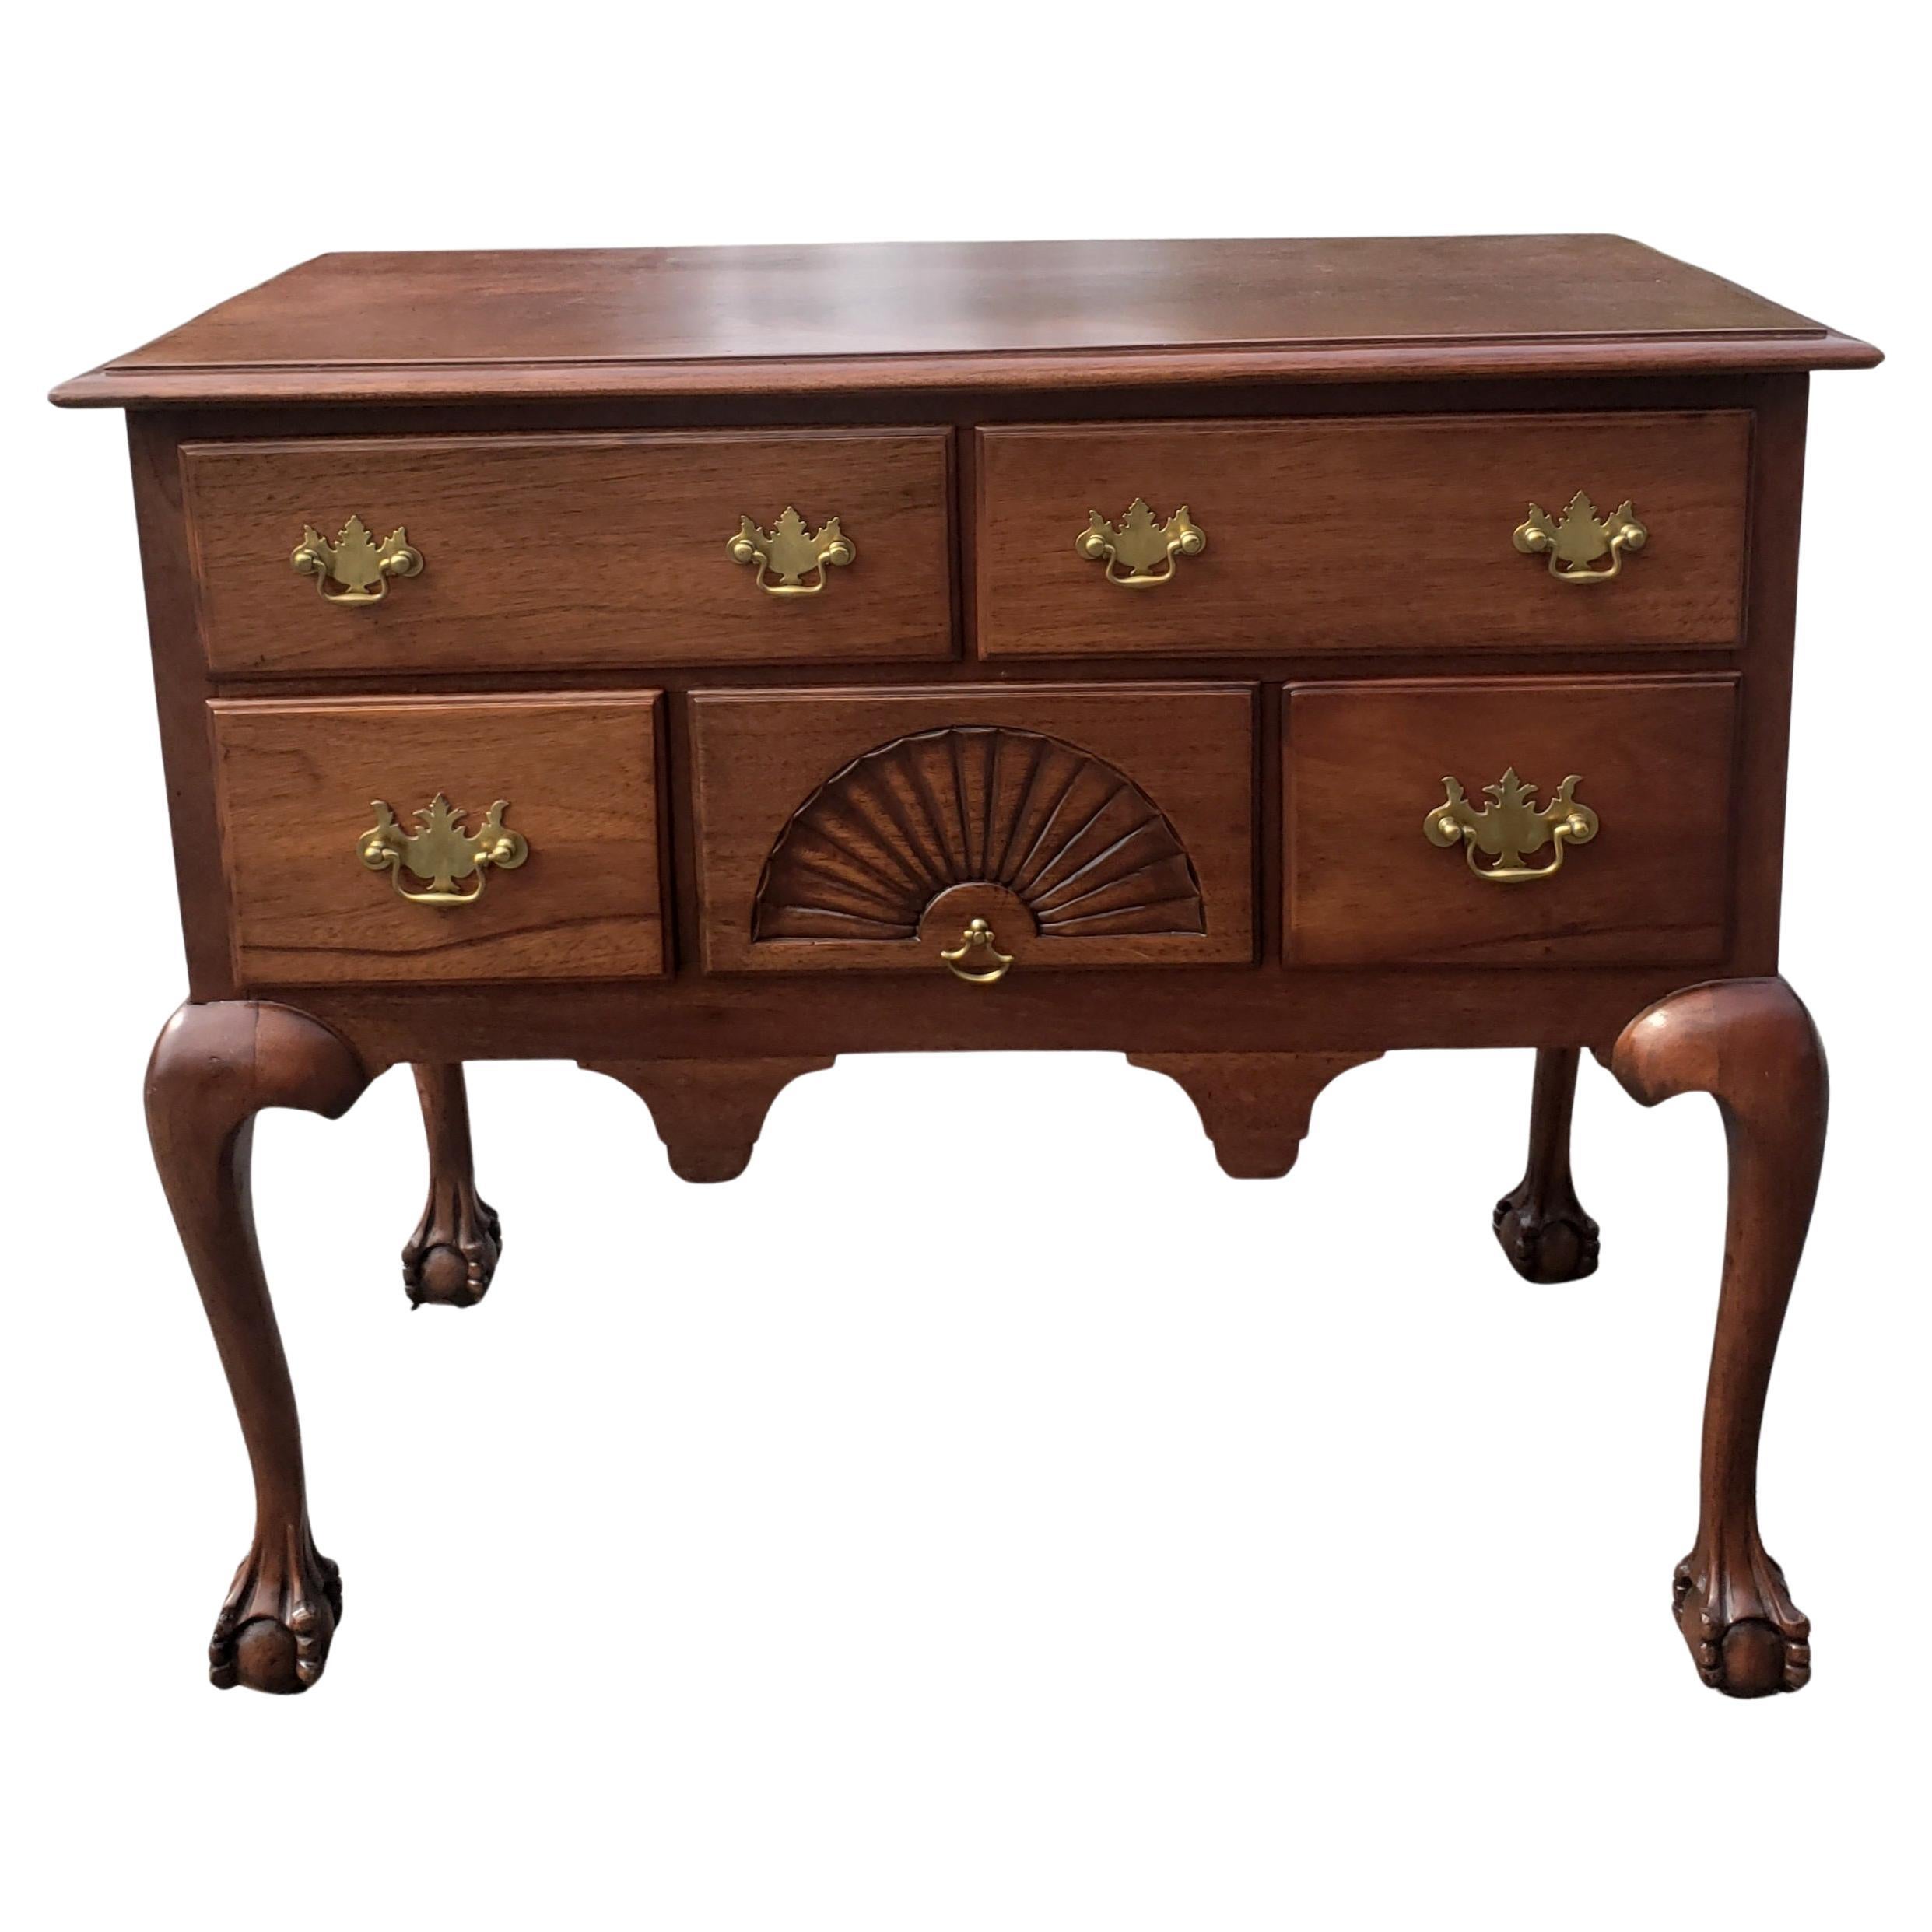 Late 19th Century Chippendale Mahogany Lowboy with Ball and Claw Feet For Sale 3